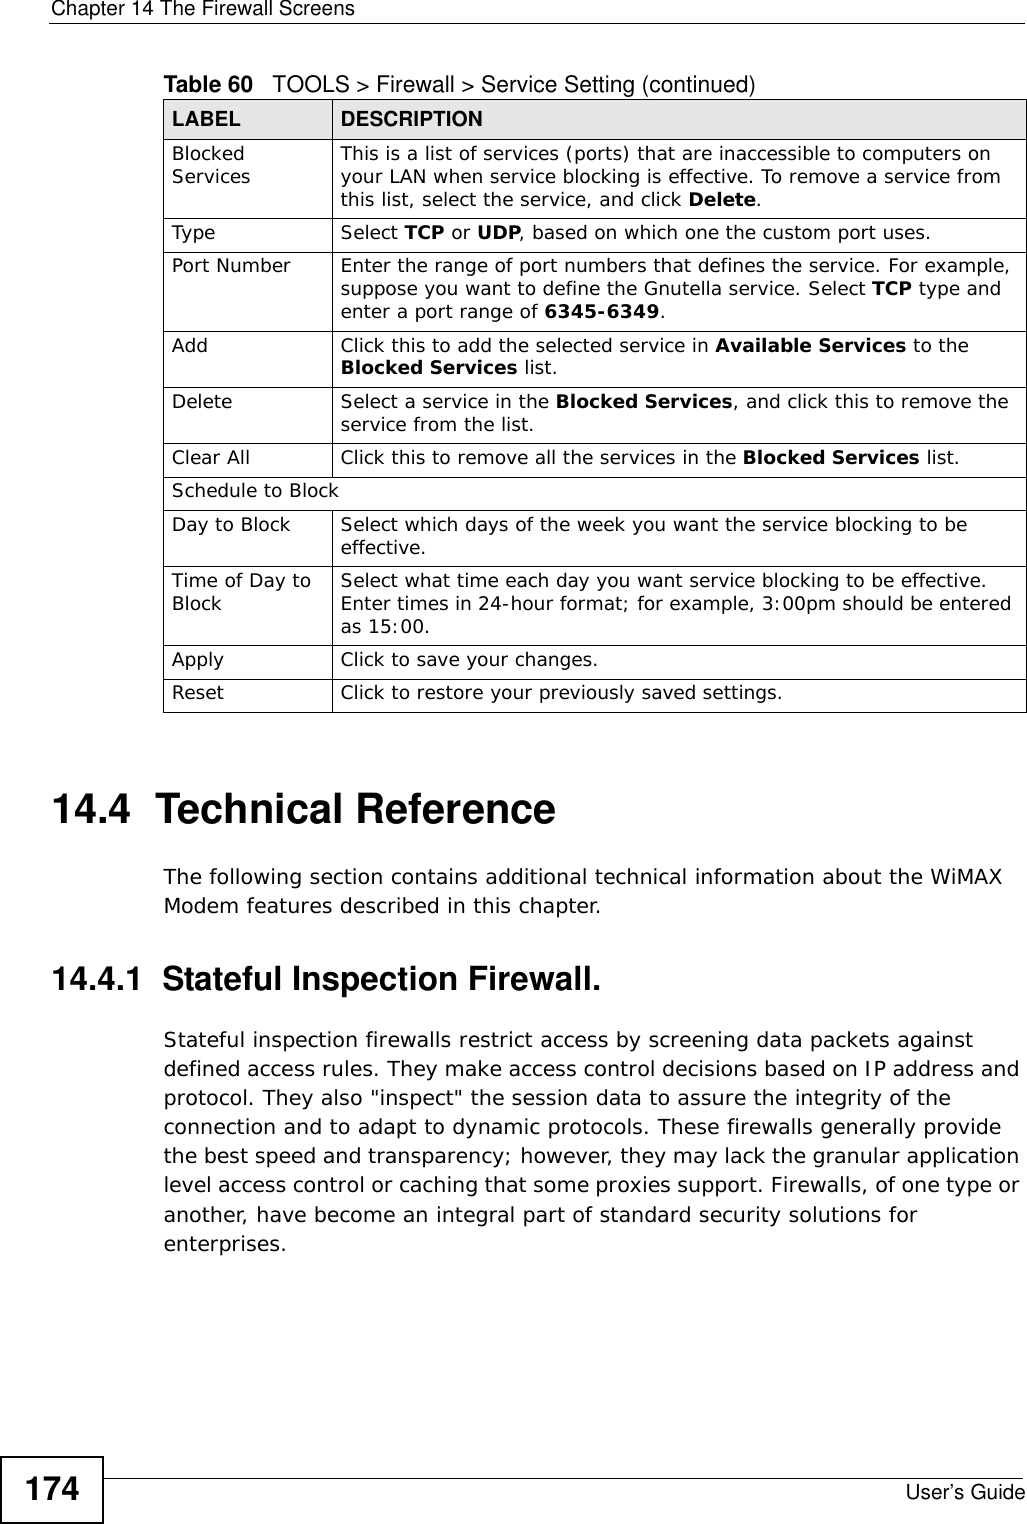 Chapter 14 The Firewall ScreensUser’s Guide17414.4  Technical ReferenceThe following section contains additional technical information about the WiMAX Modem features described in this chapter.14.4.1  Stateful Inspection Firewall.Stateful inspection firewalls restrict access by screening data packets against defined access rules. They make access control decisions based on IP address and protocol. They also &quot;inspect&quot; the session data to assure the integrity of the connection and to adapt to dynamic protocols. These firewalls generally provide the best speed and transparency; however, they may lack the granular application level access control or caching that some proxies support. Firewalls, of one type or another, have become an integral part of standard security solutions for enterprises.Blocked Services This is a list of services (ports) that are inaccessible to computers on your LAN when service blocking is effective. To remove a service from this list, select the service, and click Delete.Type Select TCP or UDP, based on which one the custom port uses.Port Number Enter the range of port numbers that defines the service. For example, suppose you want to define the Gnutella service. Select TCP type and enter a port range of 6345-6349.Add Click this to add the selected service in Available Services to the Blocked Services list.Delete Select a service in the Blocked Services, and click this to remove the service from the list.Clear All Click this to remove all the services in the Blocked Services list.Schedule to BlockDay to Block Select which days of the week you want the service blocking to be effective.Time of Day to Block Select what time each day you want service blocking to be effective. Enter times in 24-hour format; for example, 3:00pm should be entered as 15:00.Apply Click to save your changes.Reset Click to restore your previously saved settings.Table 60   TOOLS &gt; Firewall &gt; Service Setting (continued)LABEL DESCRIPTION